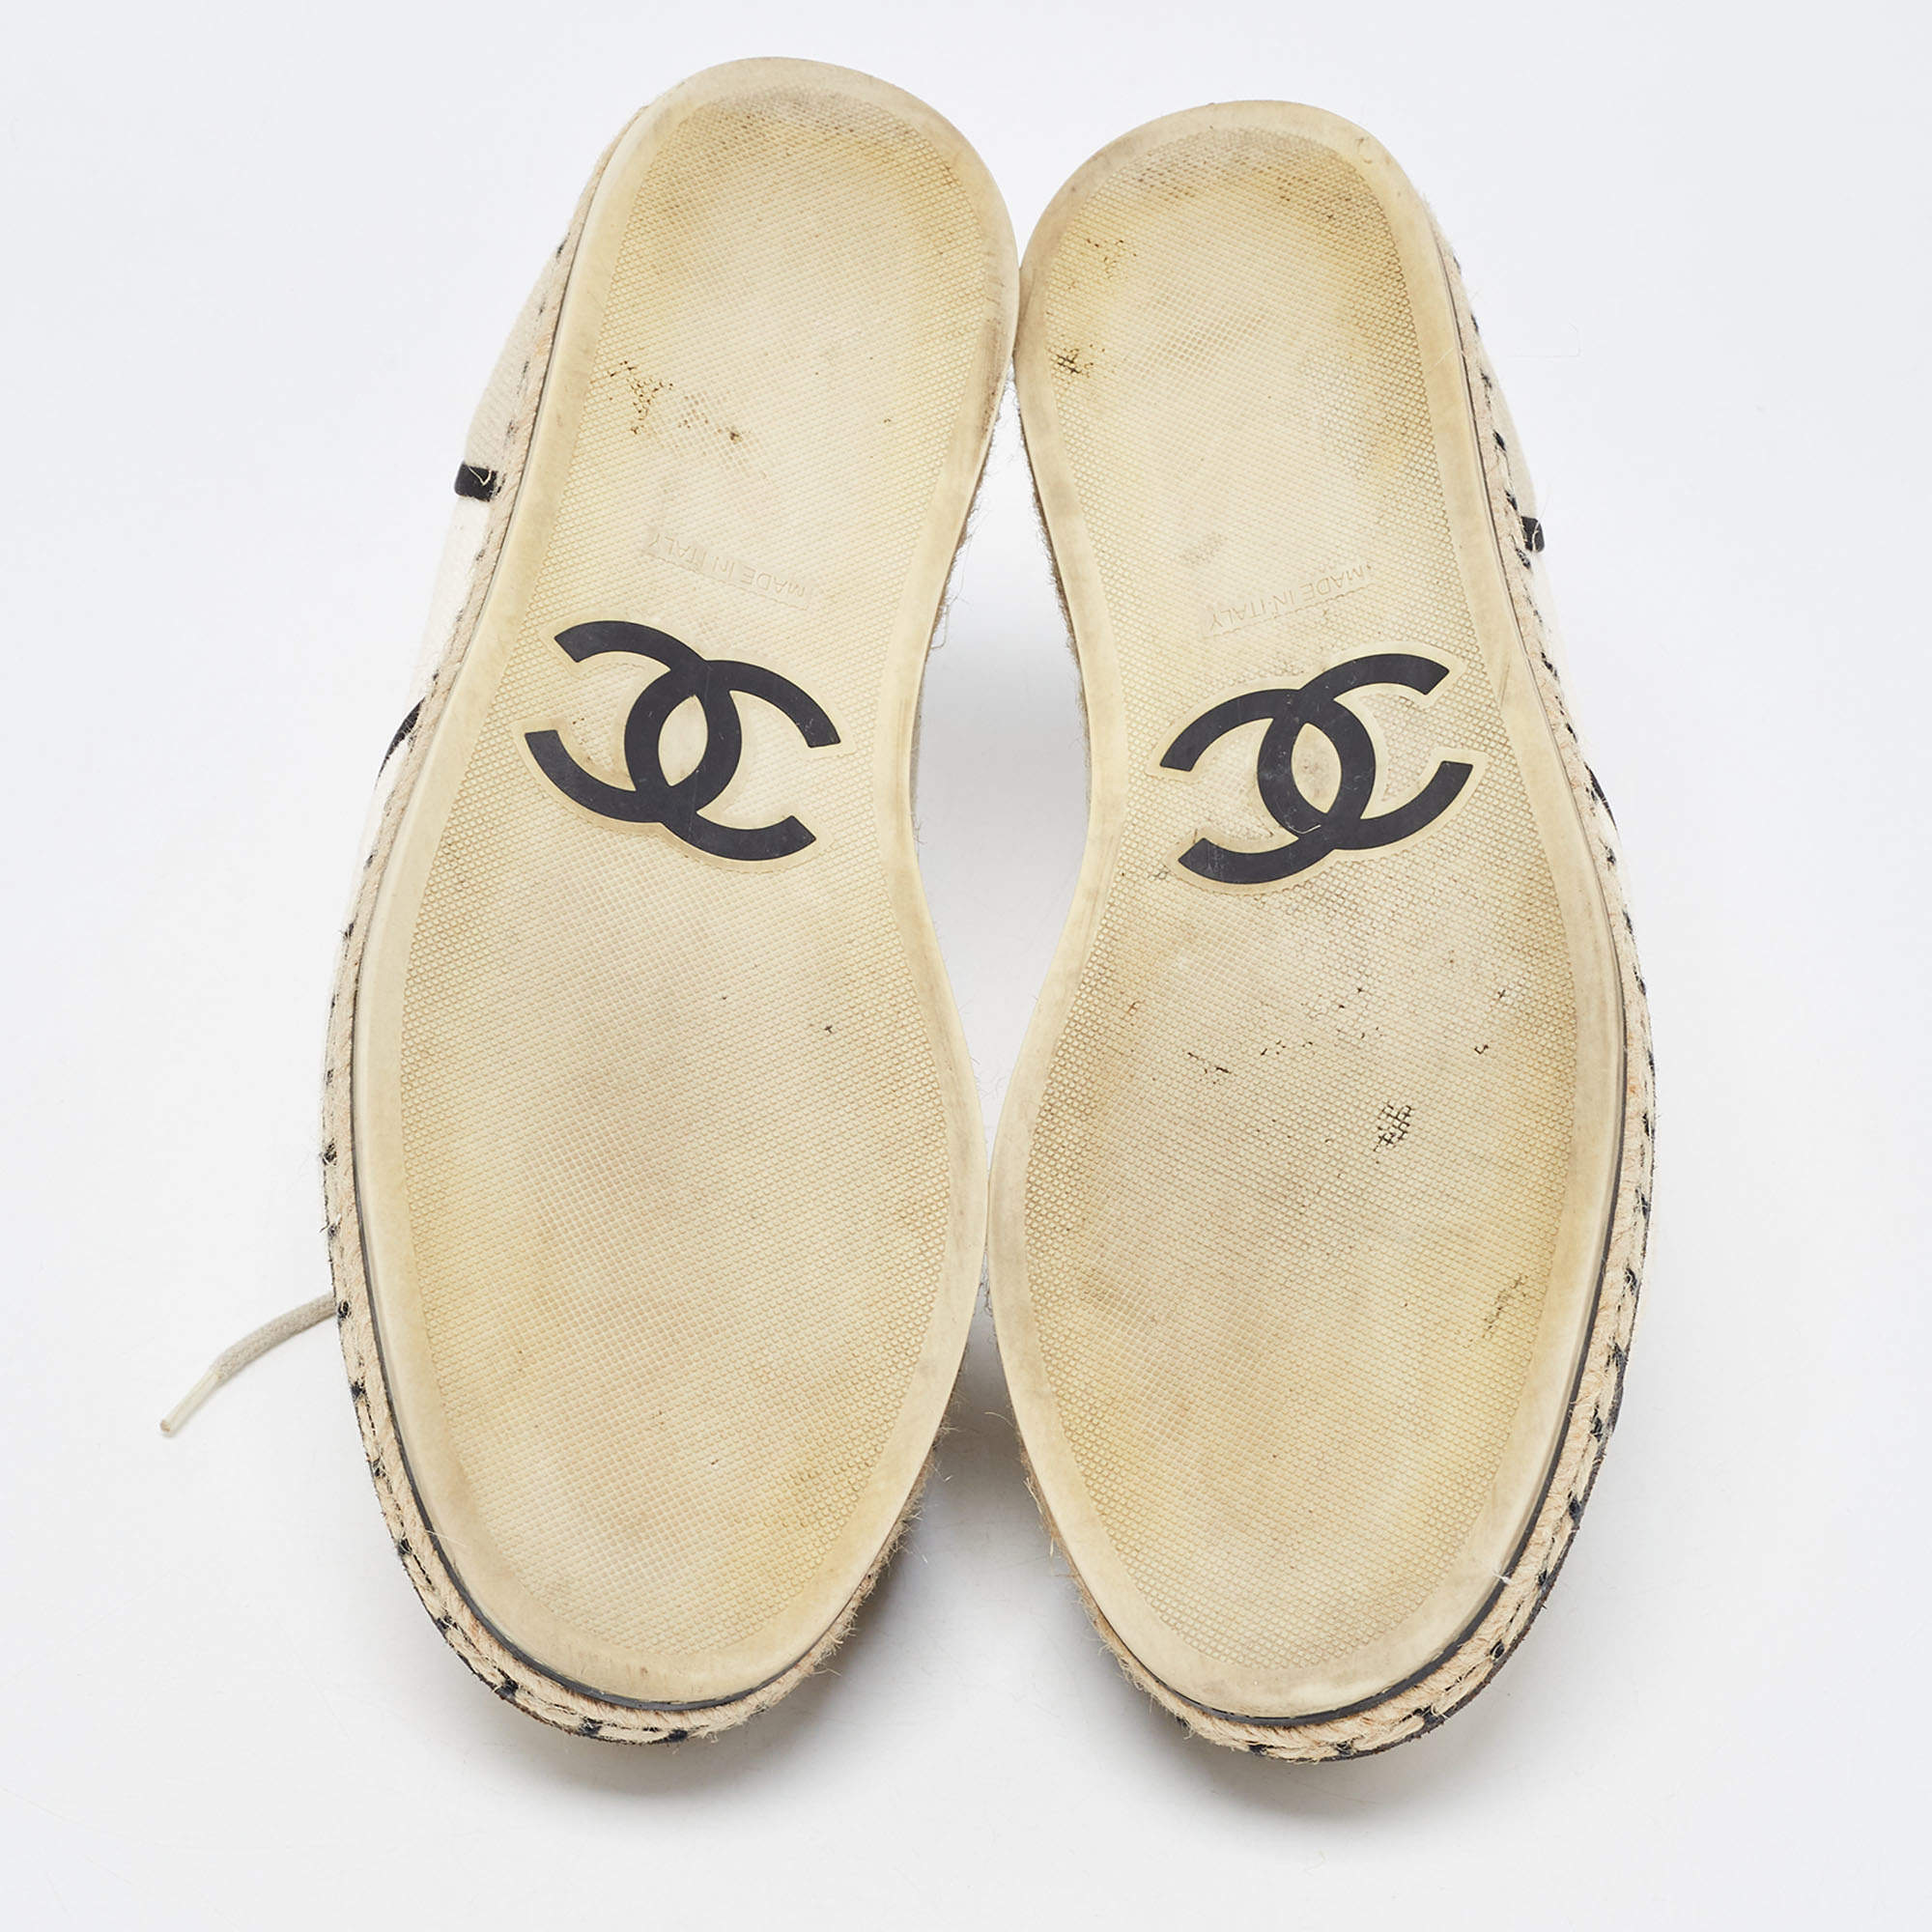 Chanel Espadrilles - Flip And Style